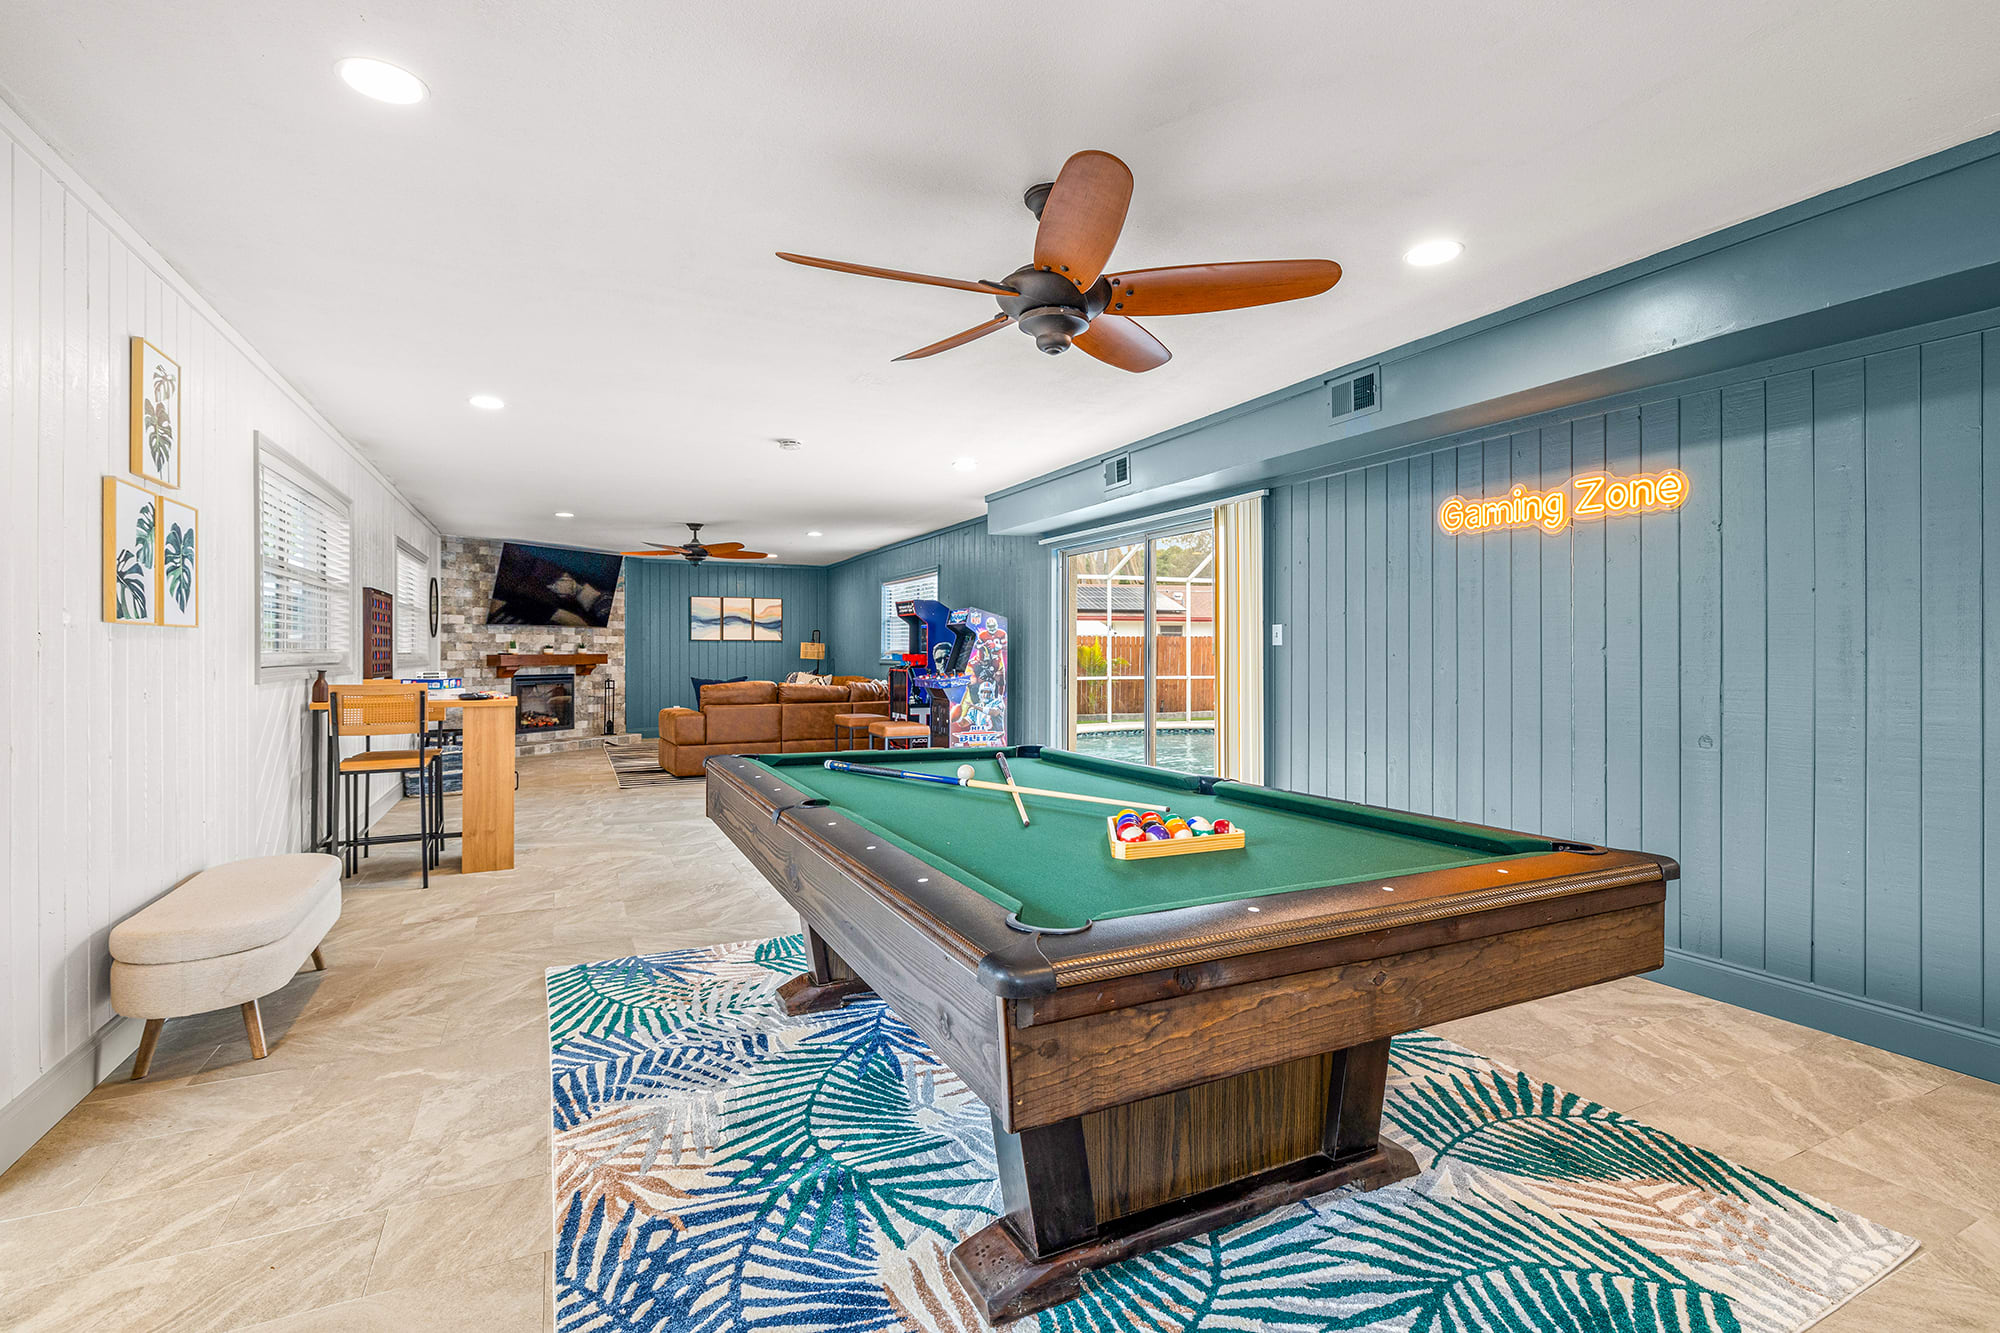 Game room with Pool Table, Skee Ball, Arcade Games and Board Games